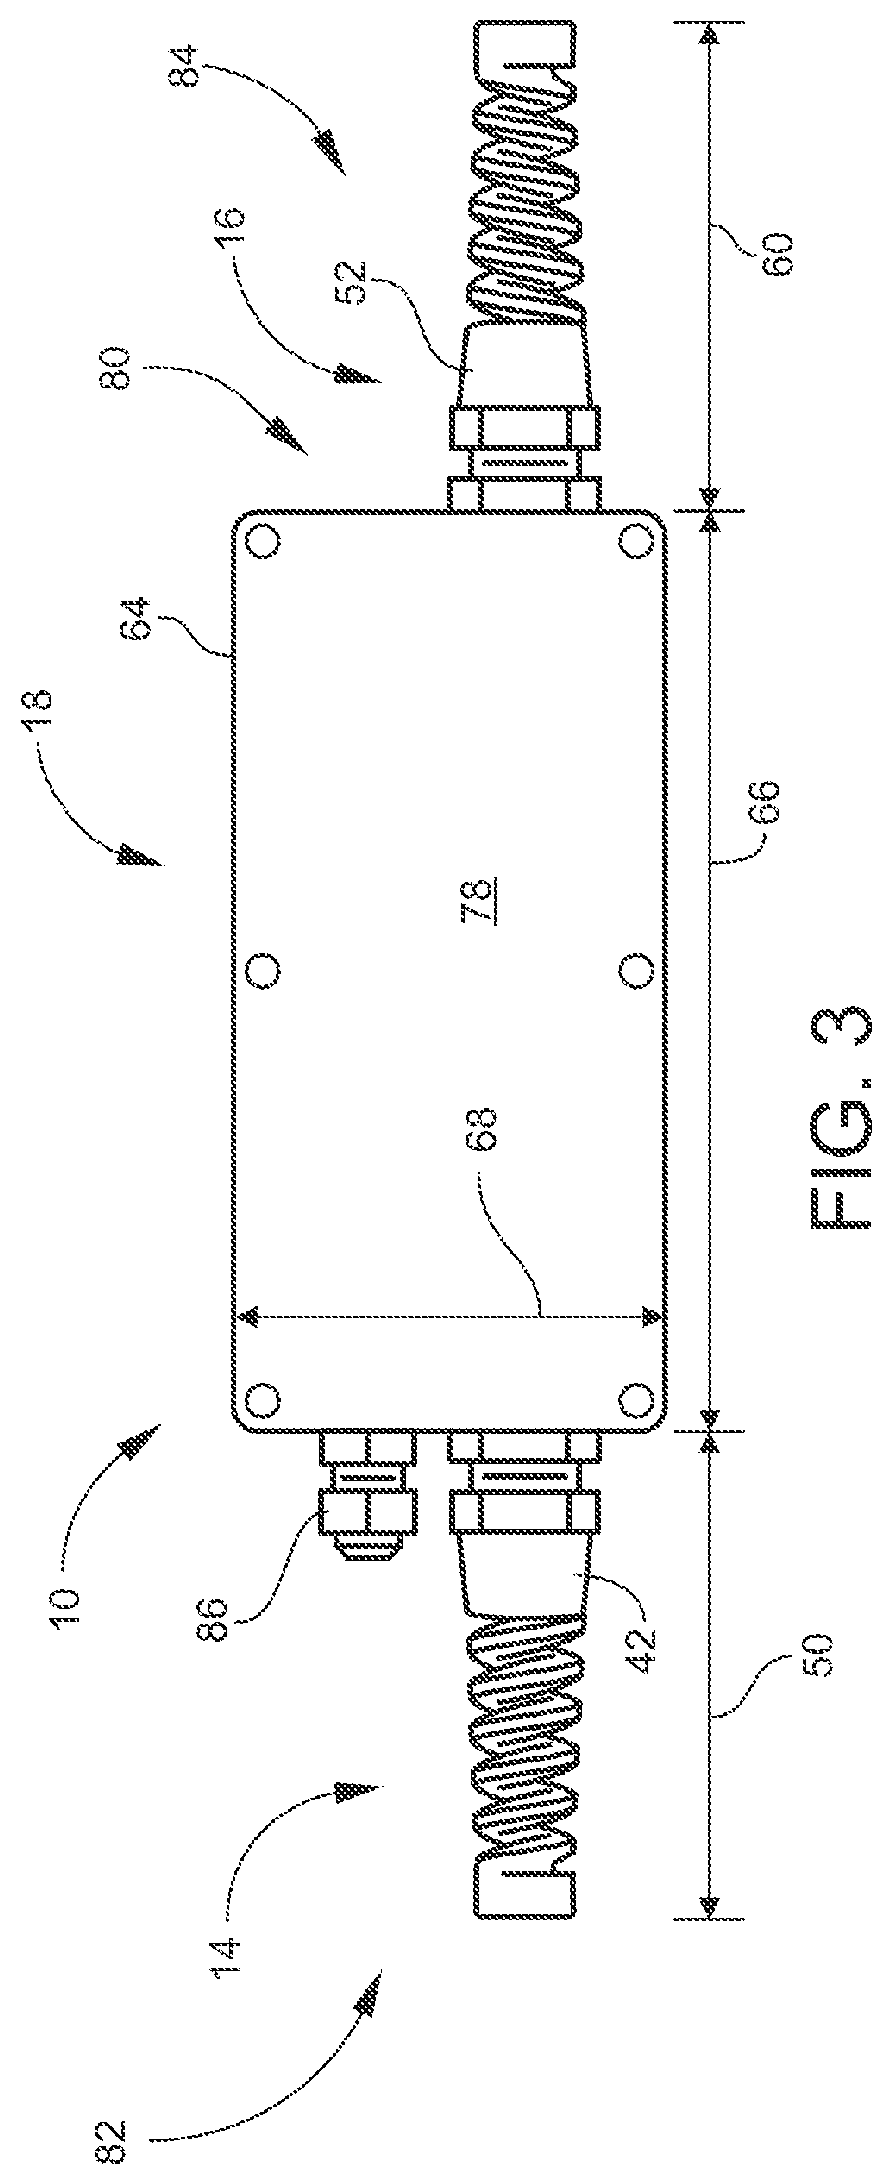 Electronic Control for Engine Block Heater Elements